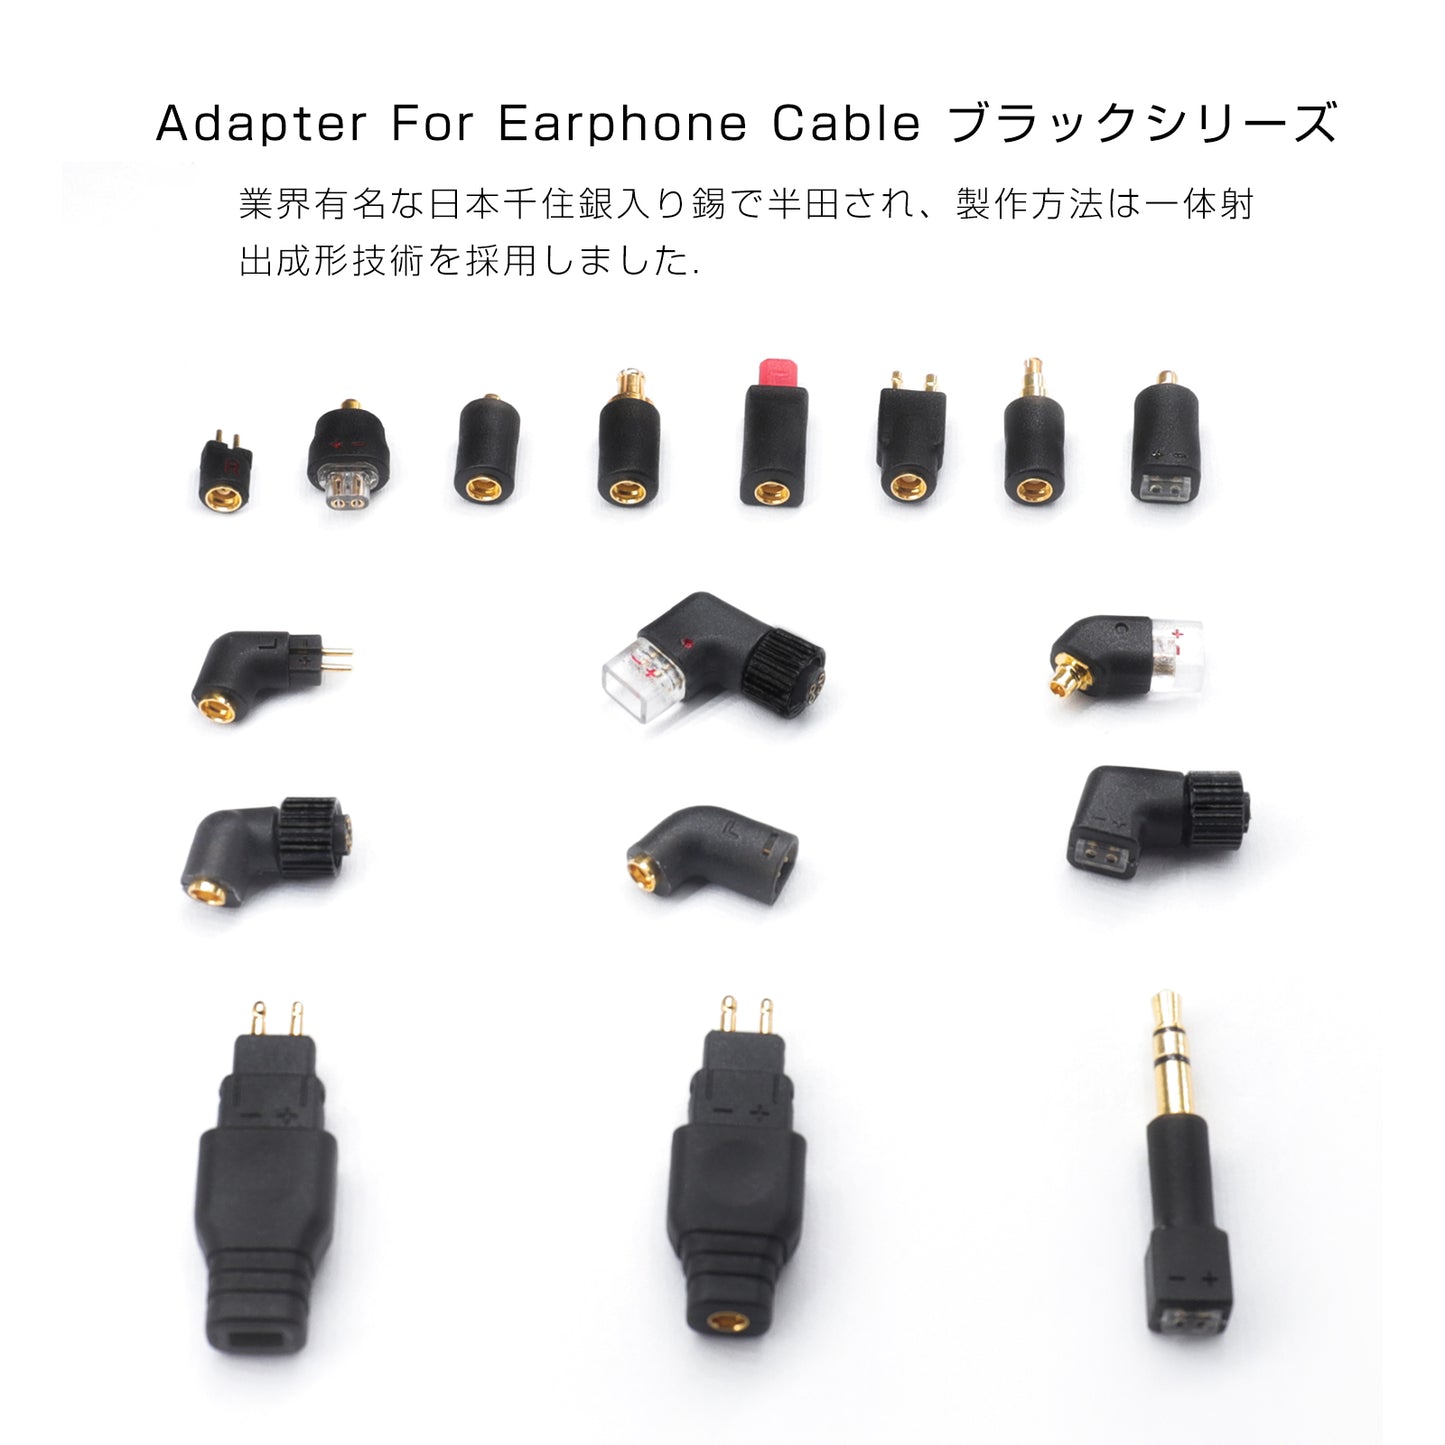 cooyin Adapters for Earphone Cable--part one